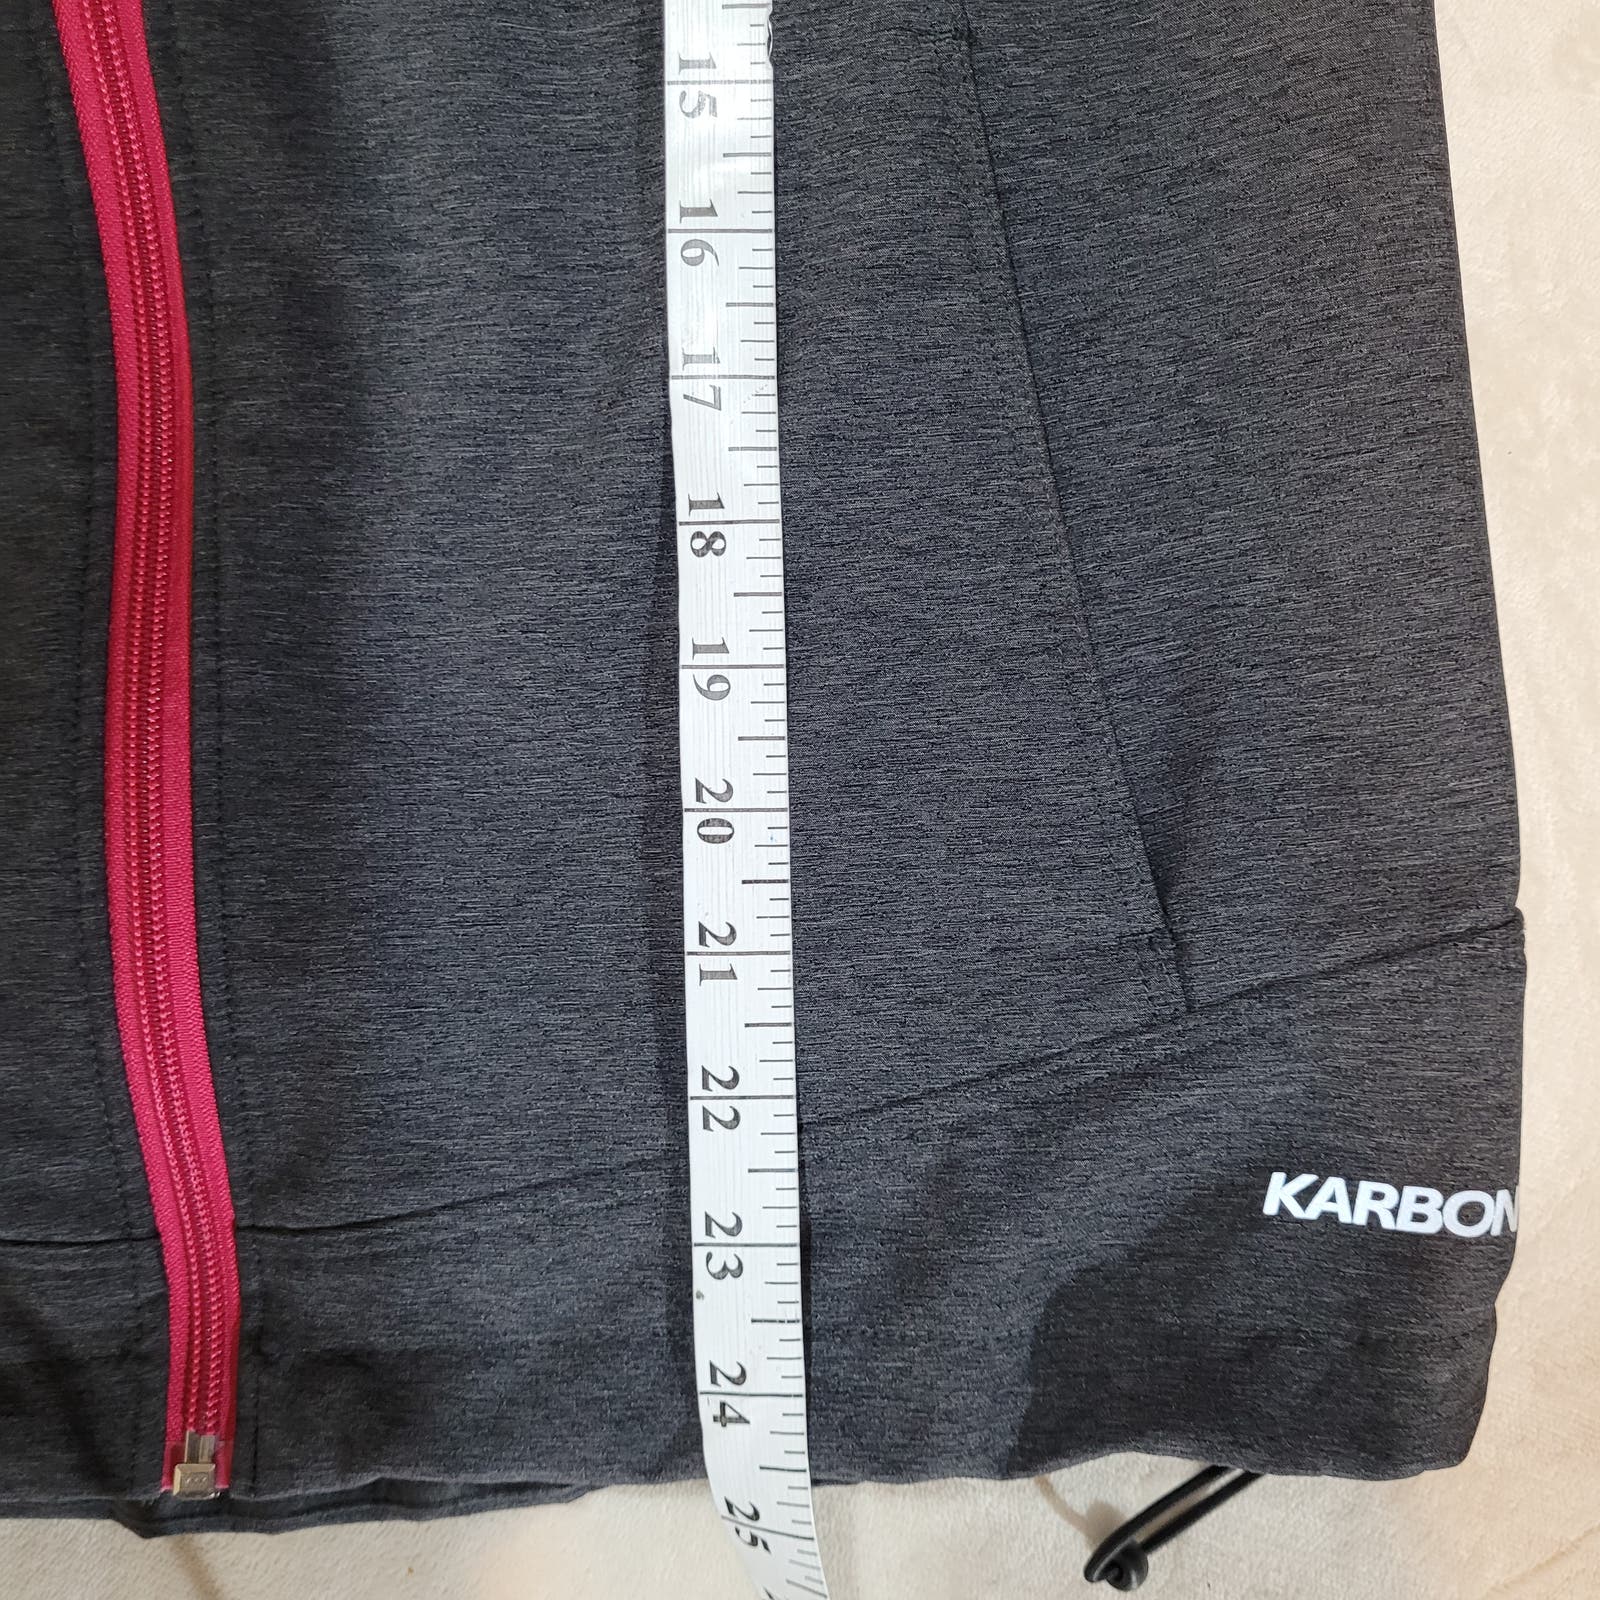 Karbon Gray Softshell Jacket with Pink Zipper - Size Large